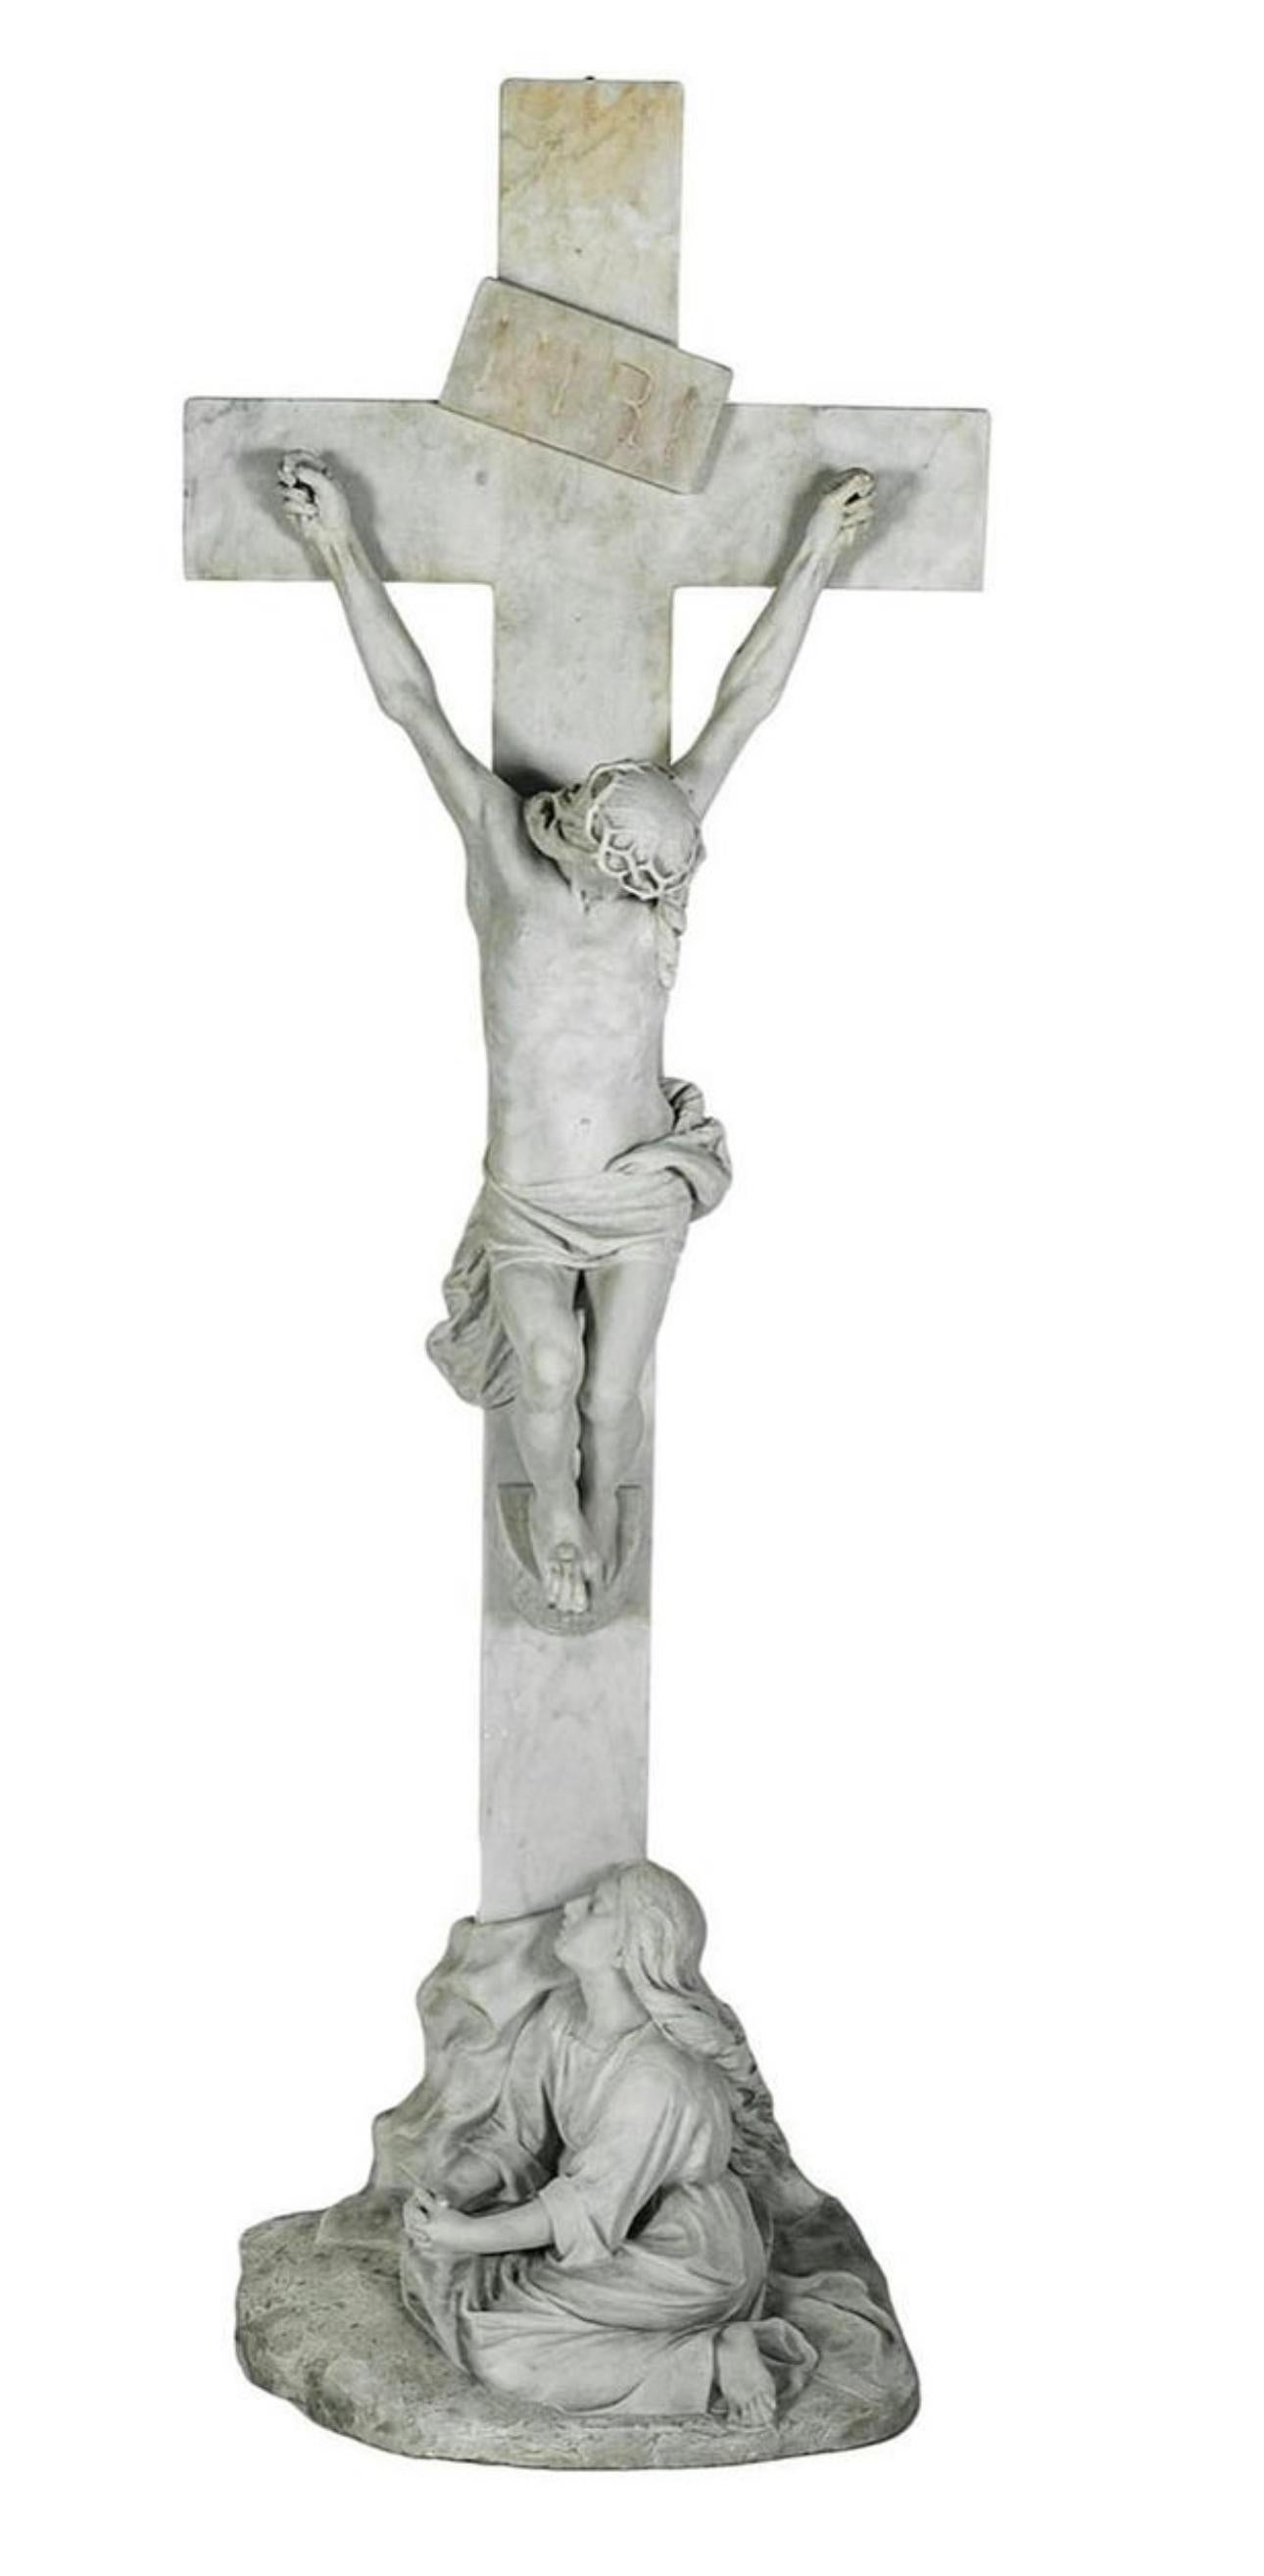 Incredible Carrara Crucifix , perfect chiseled like no one, a perfect piece for a garden or home interior, signed and dated 1925 by:
J De Pari 1857 - 1931, Born in Milan.
Francisco Brazaghi disciple at The Royal Brera Academy.